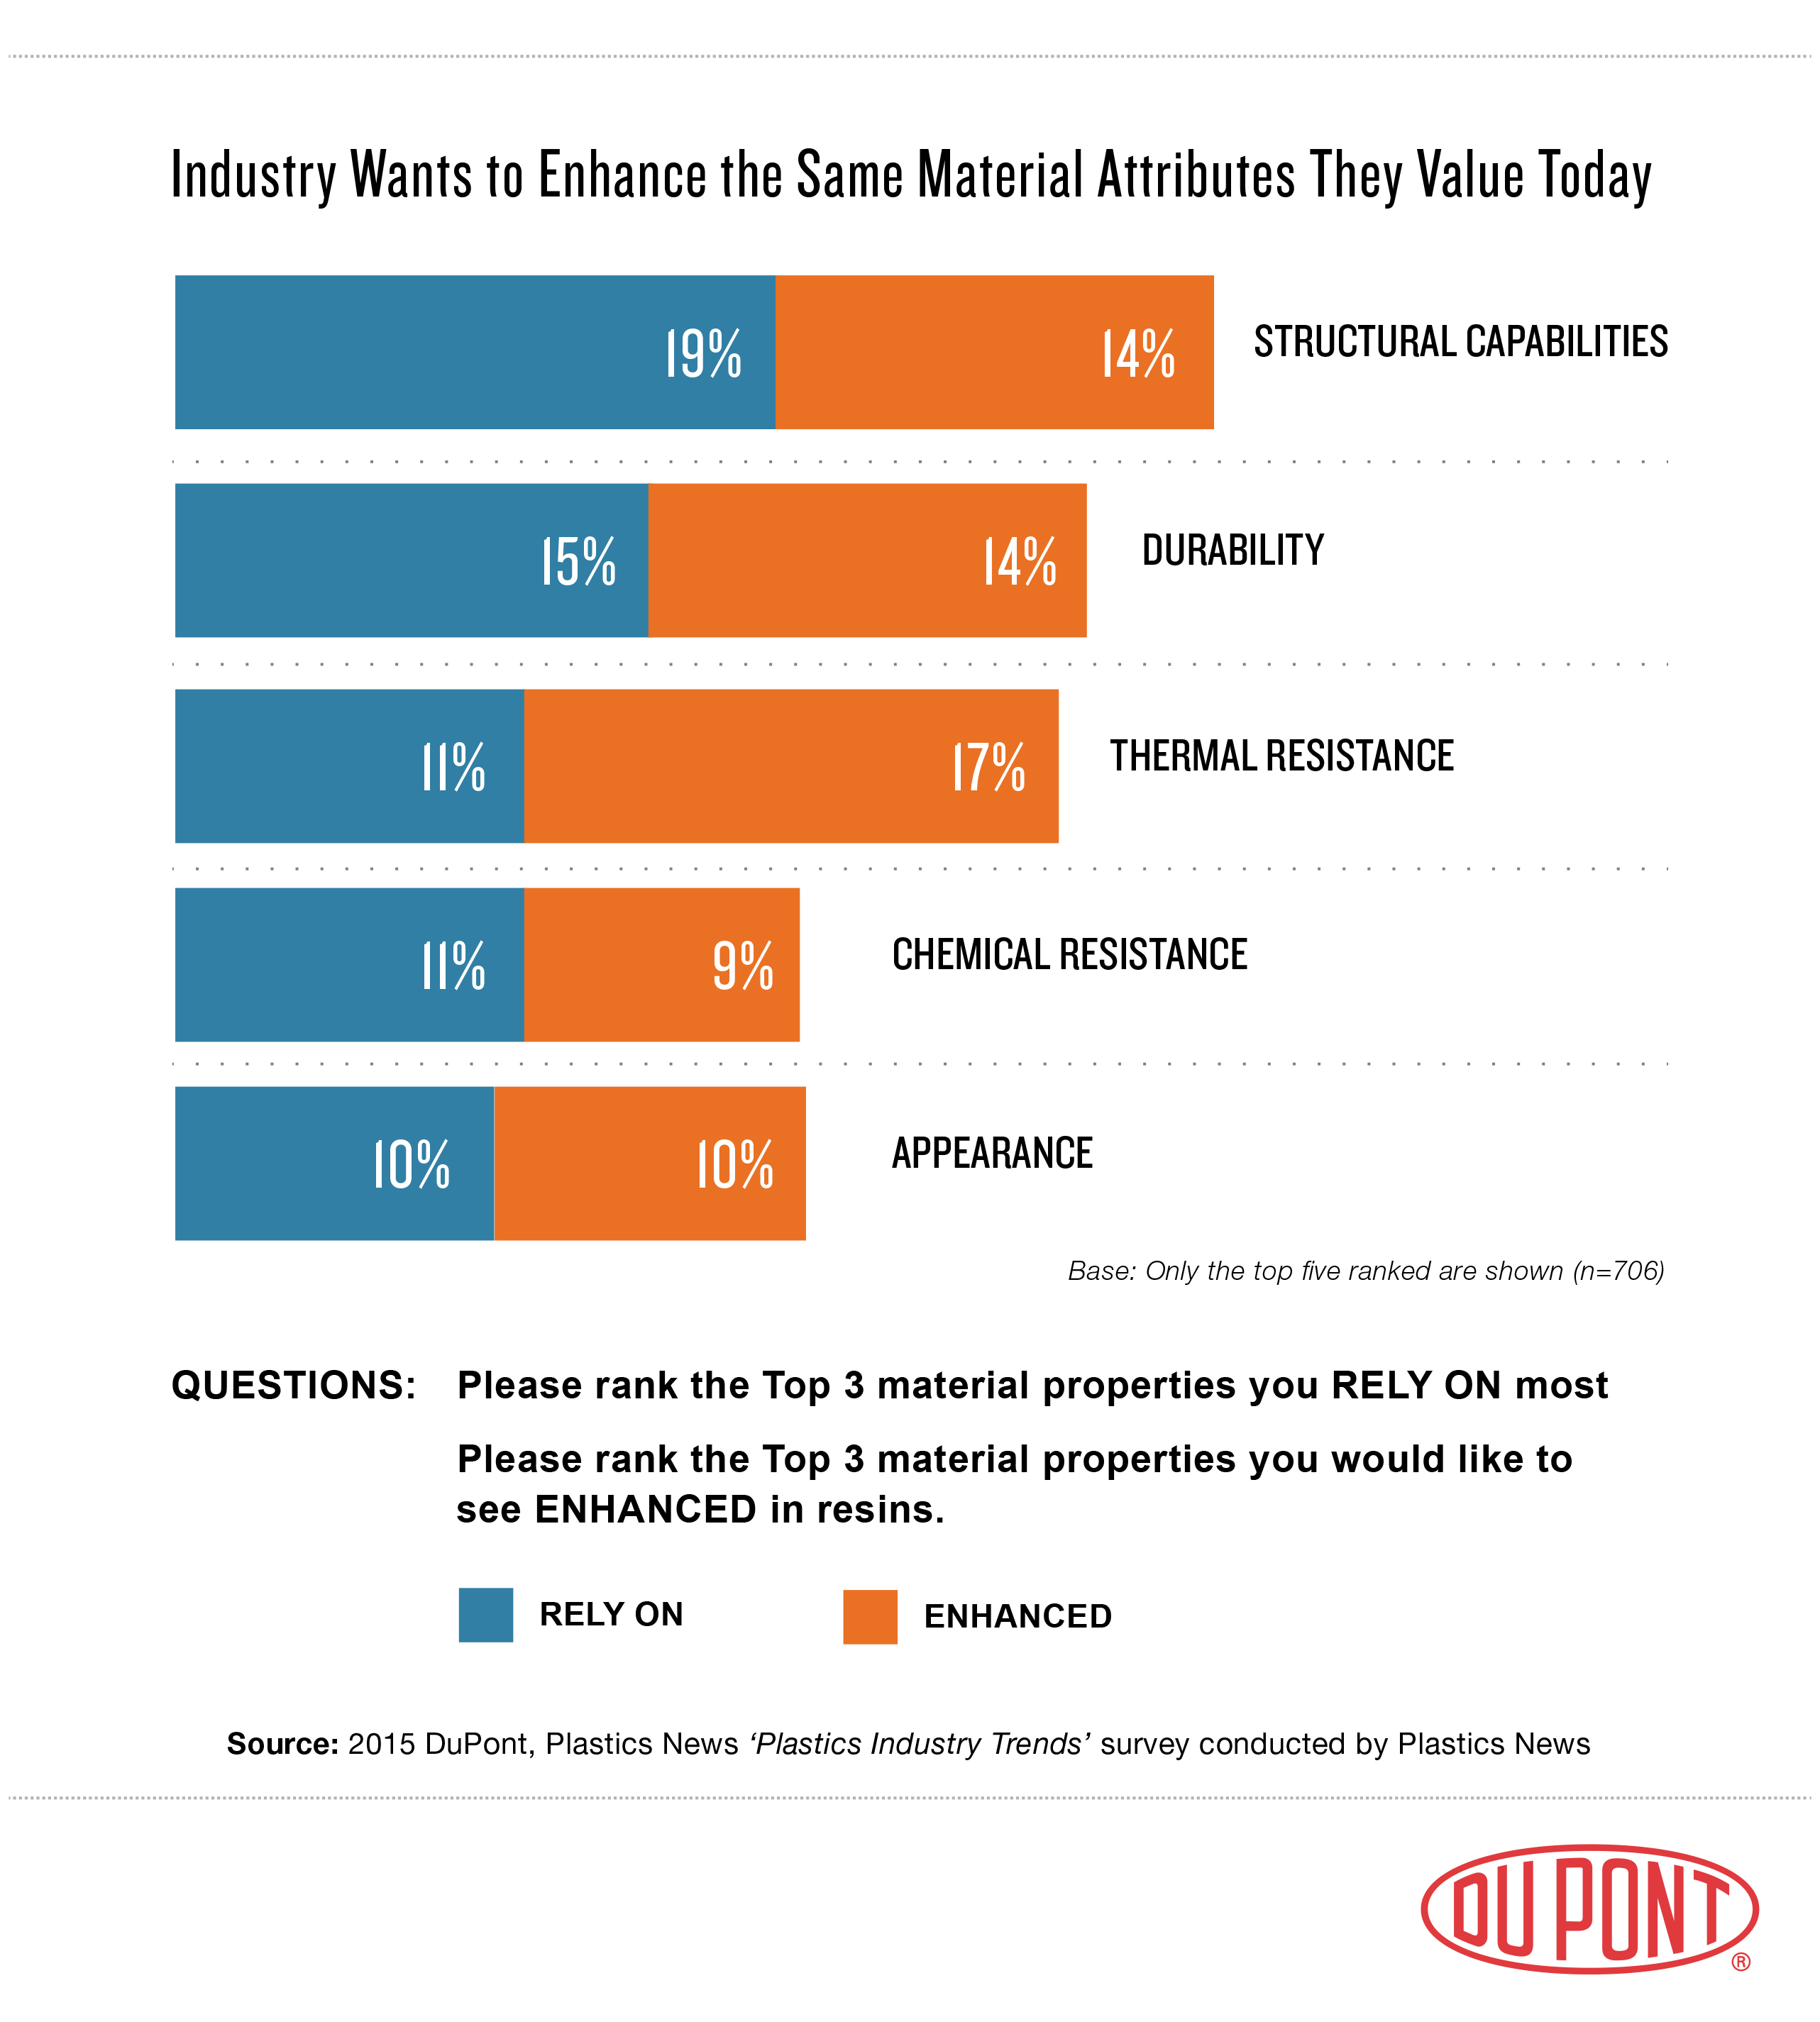 Chart 4 - Industry Wants Enhanced Material Attributes - 2015